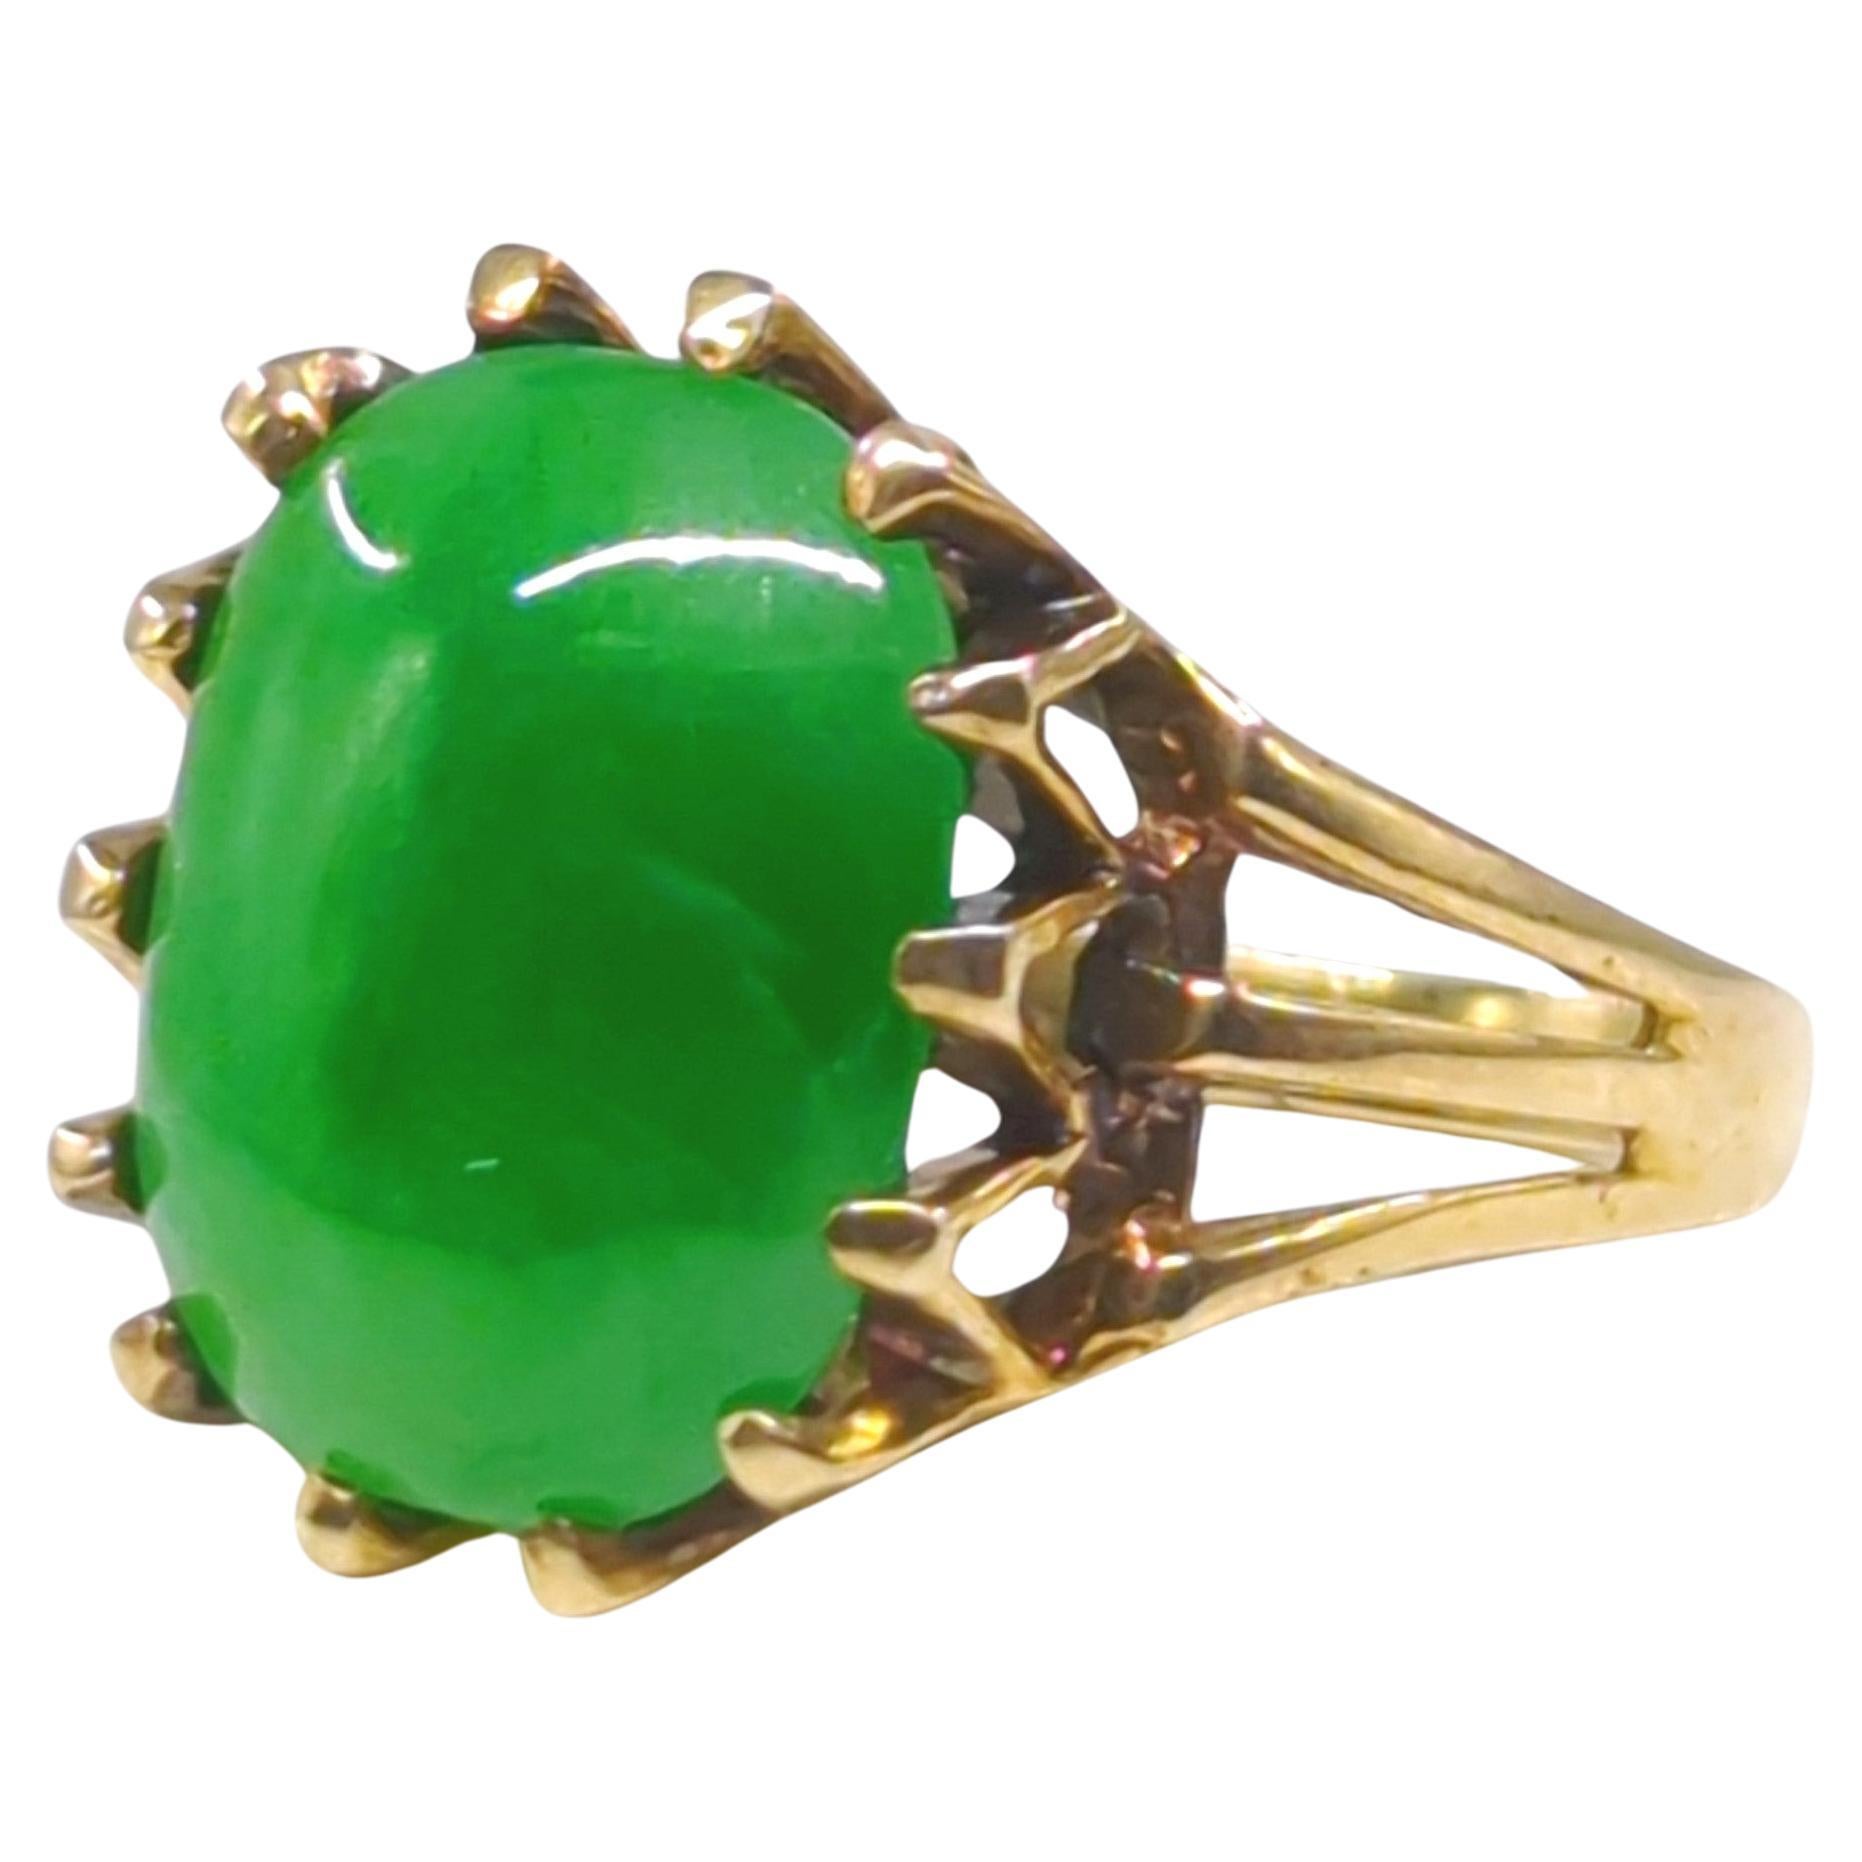 This mid-20th-century ring features an intensely colored apple green jadeite, set in a multi-prong setting of 10k yellow gold (hallmarked). The jadeite, with its vibrant and rich apple green hue, is the centerpiece of this exquisite piece, offering